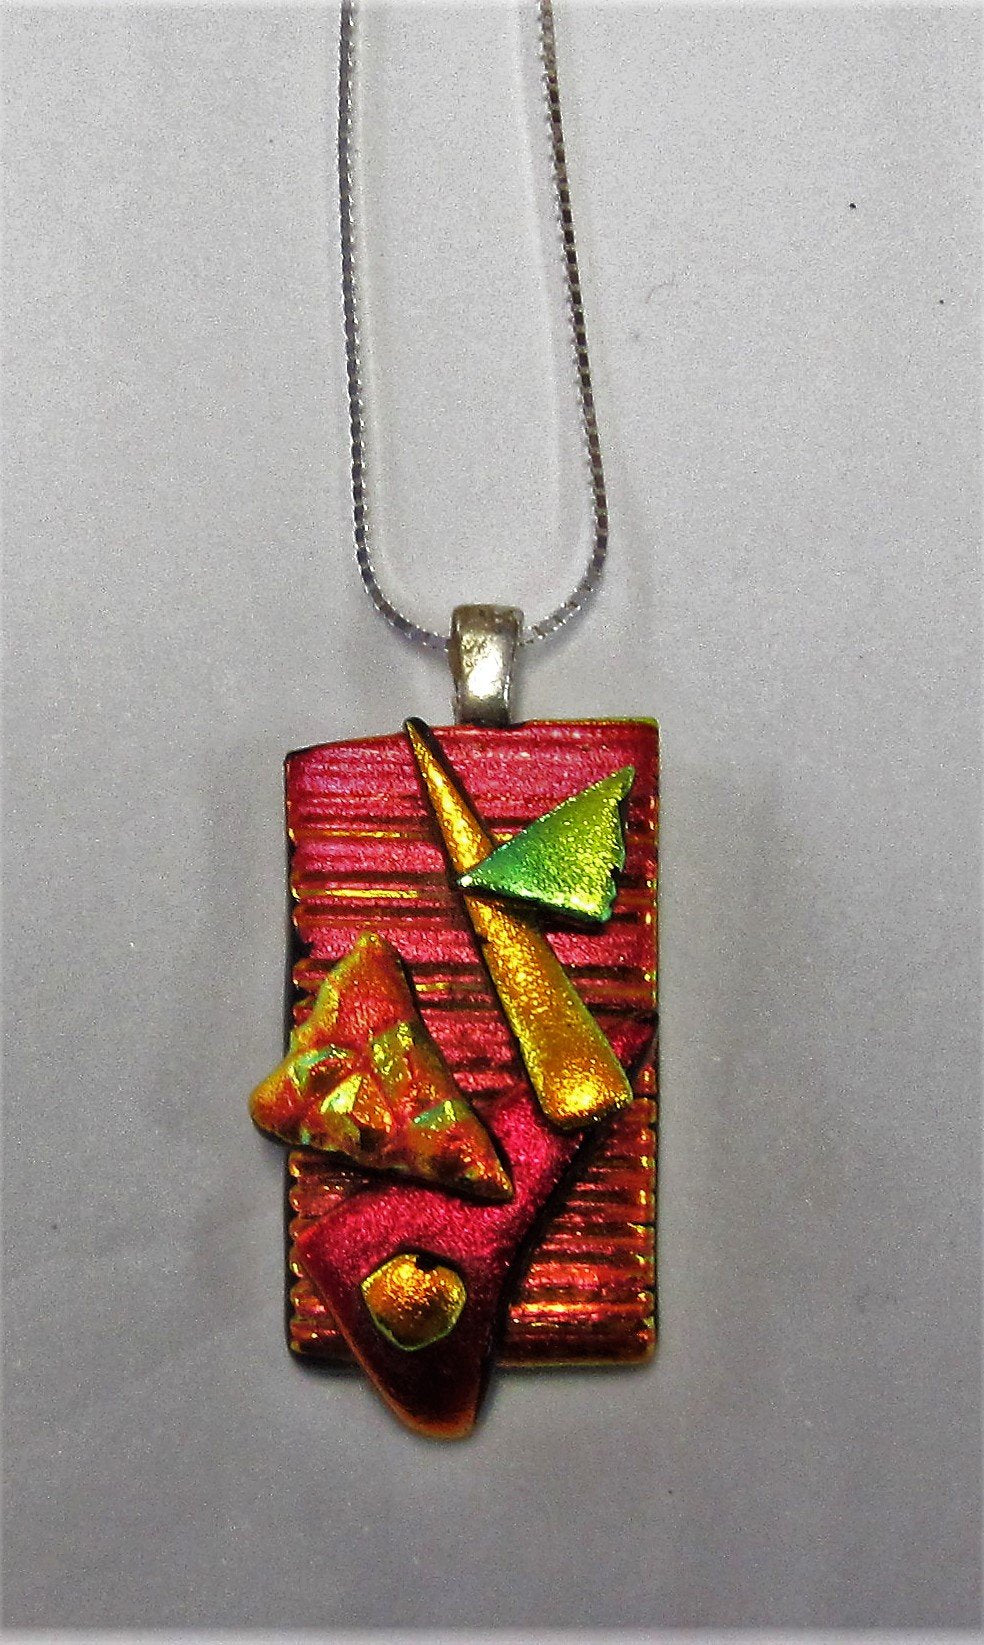 Handcrafted dichroic glass pendant on a sterling silver necklace